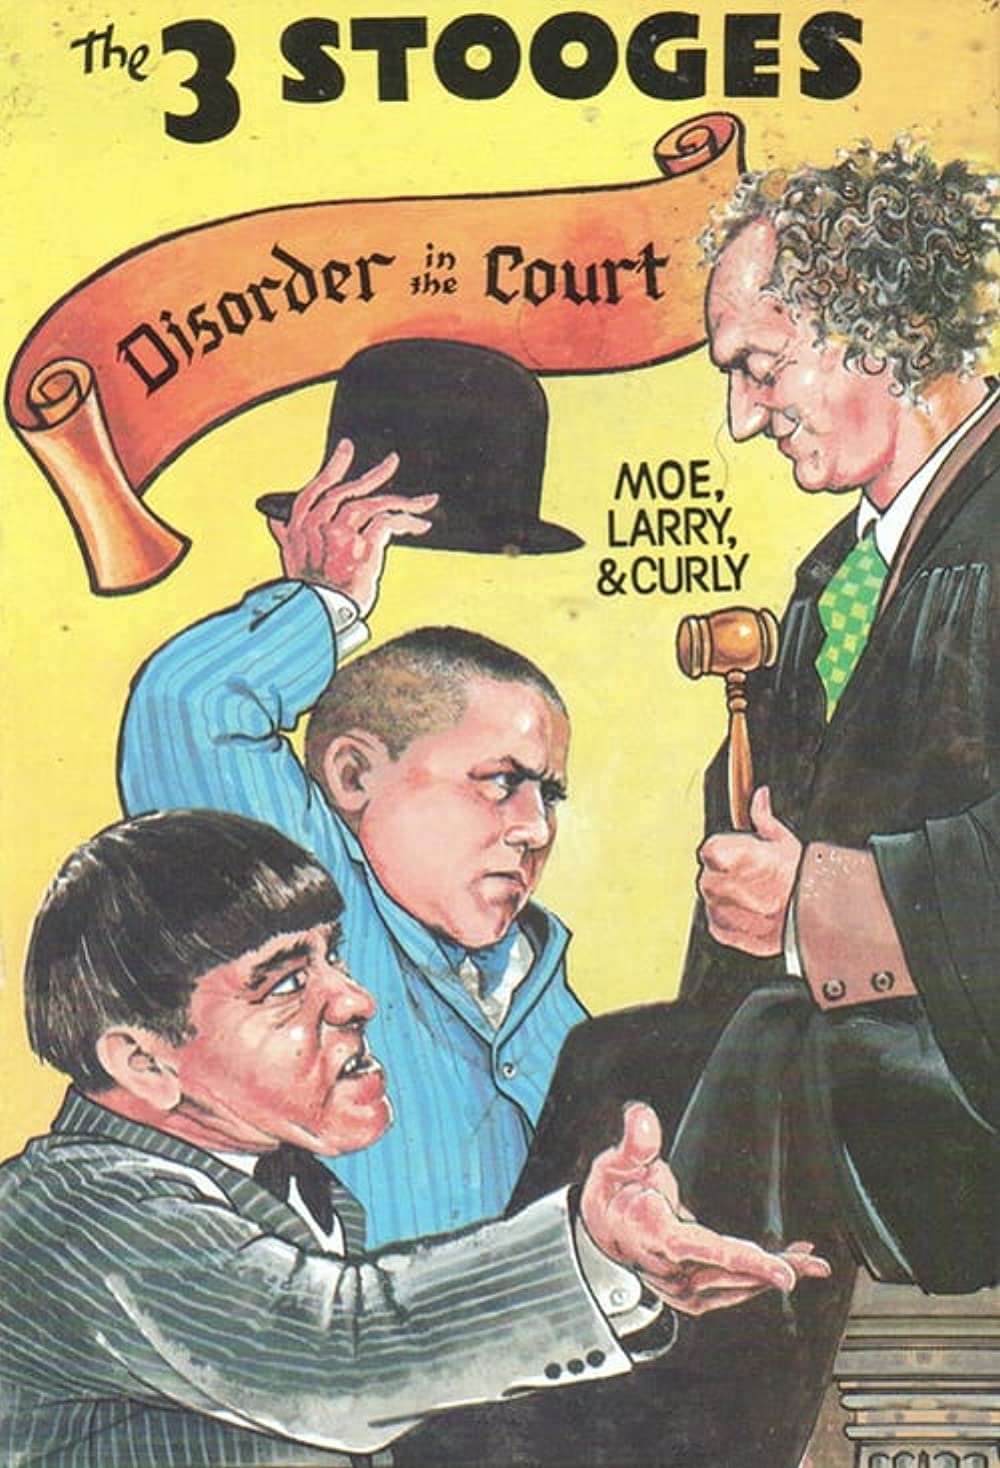 Disorder in the Court (Short 1936)